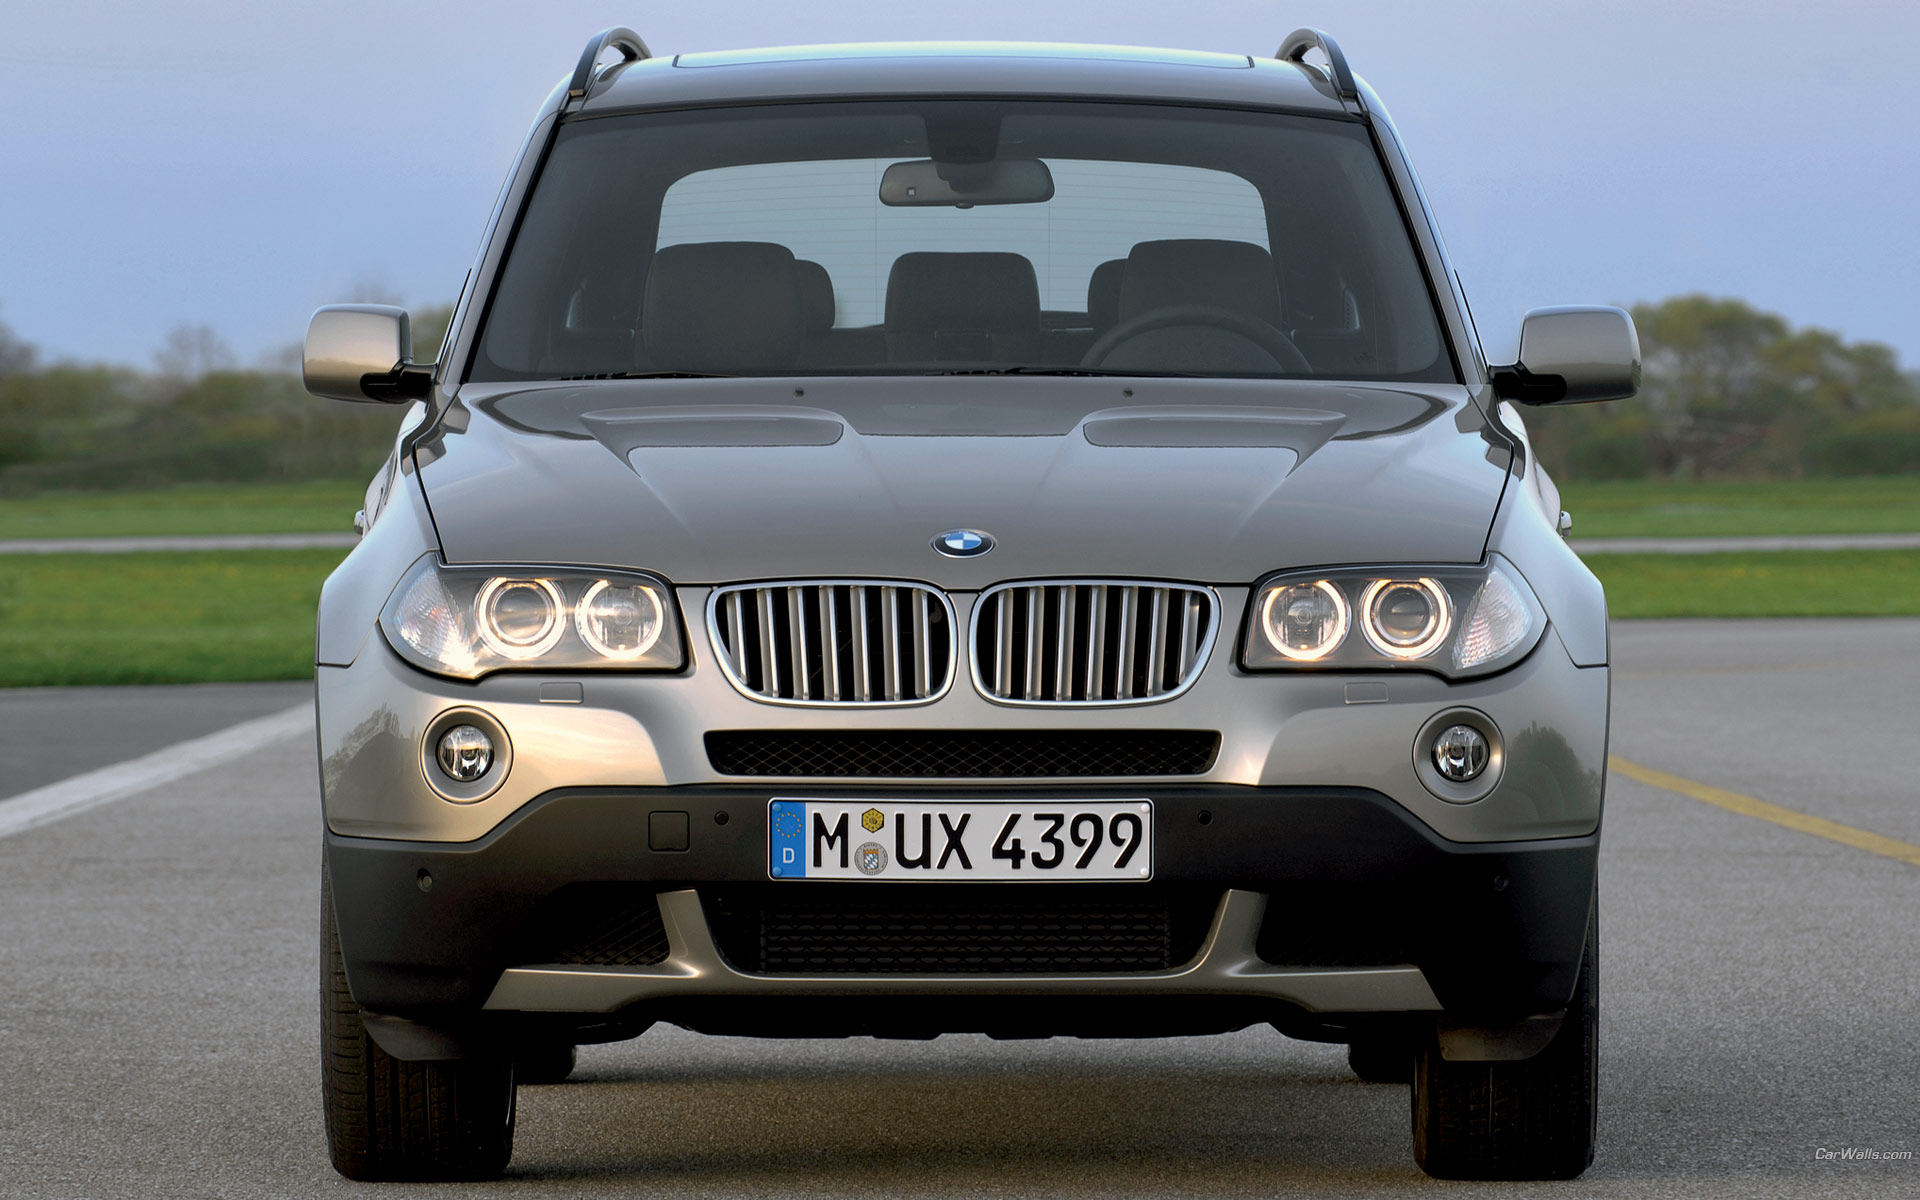 Download full size X3 front Bmw wallpaper / 1920x1200